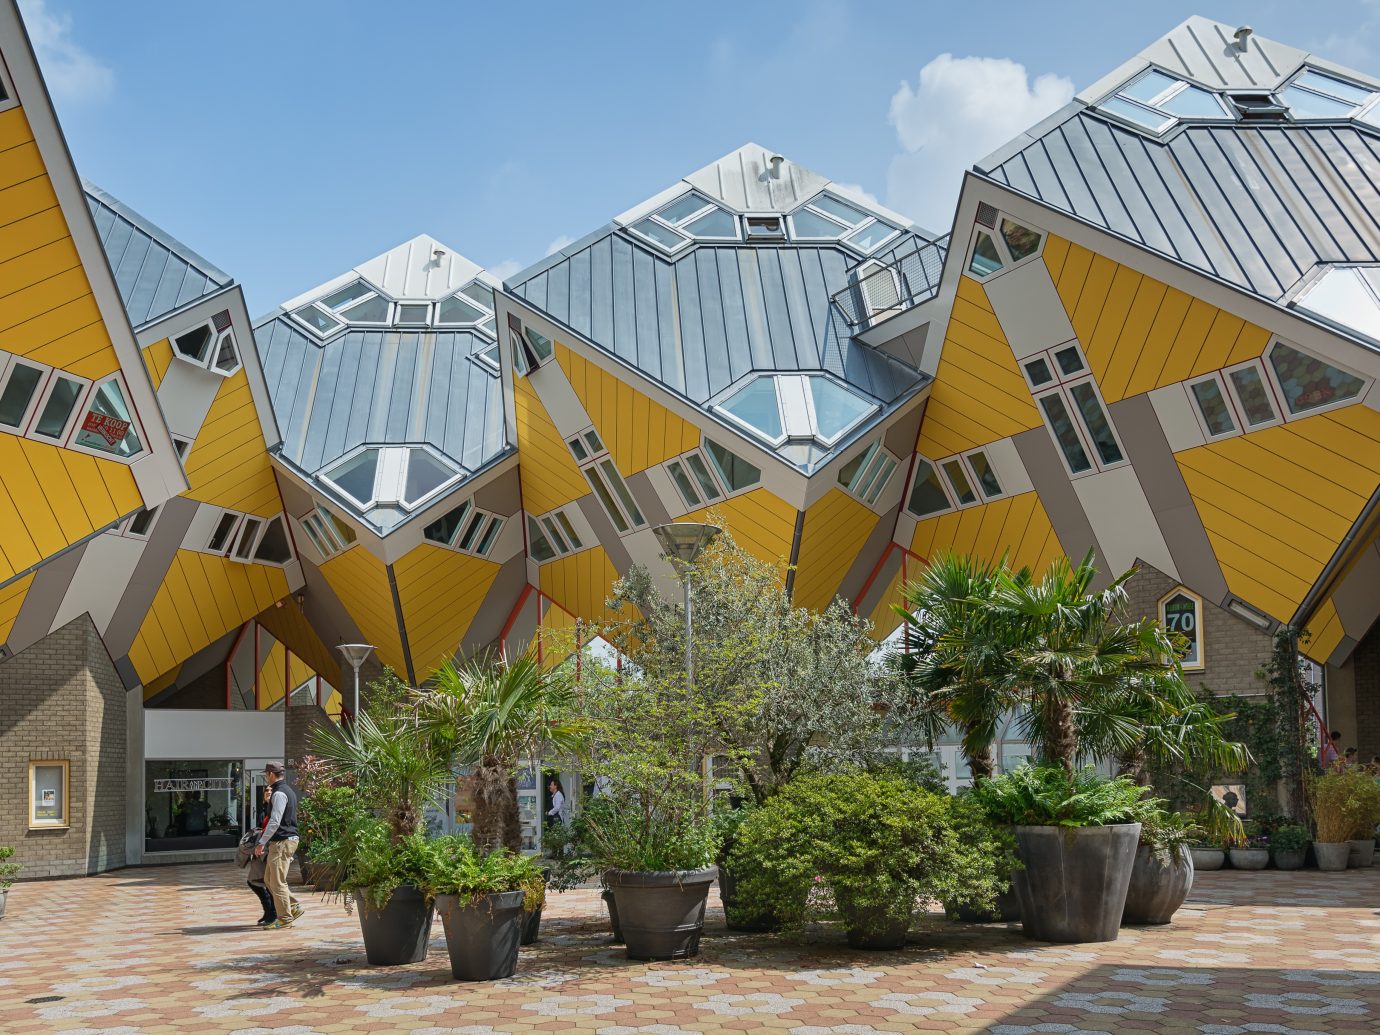 Cube houses in Rotterdam, Netherlands